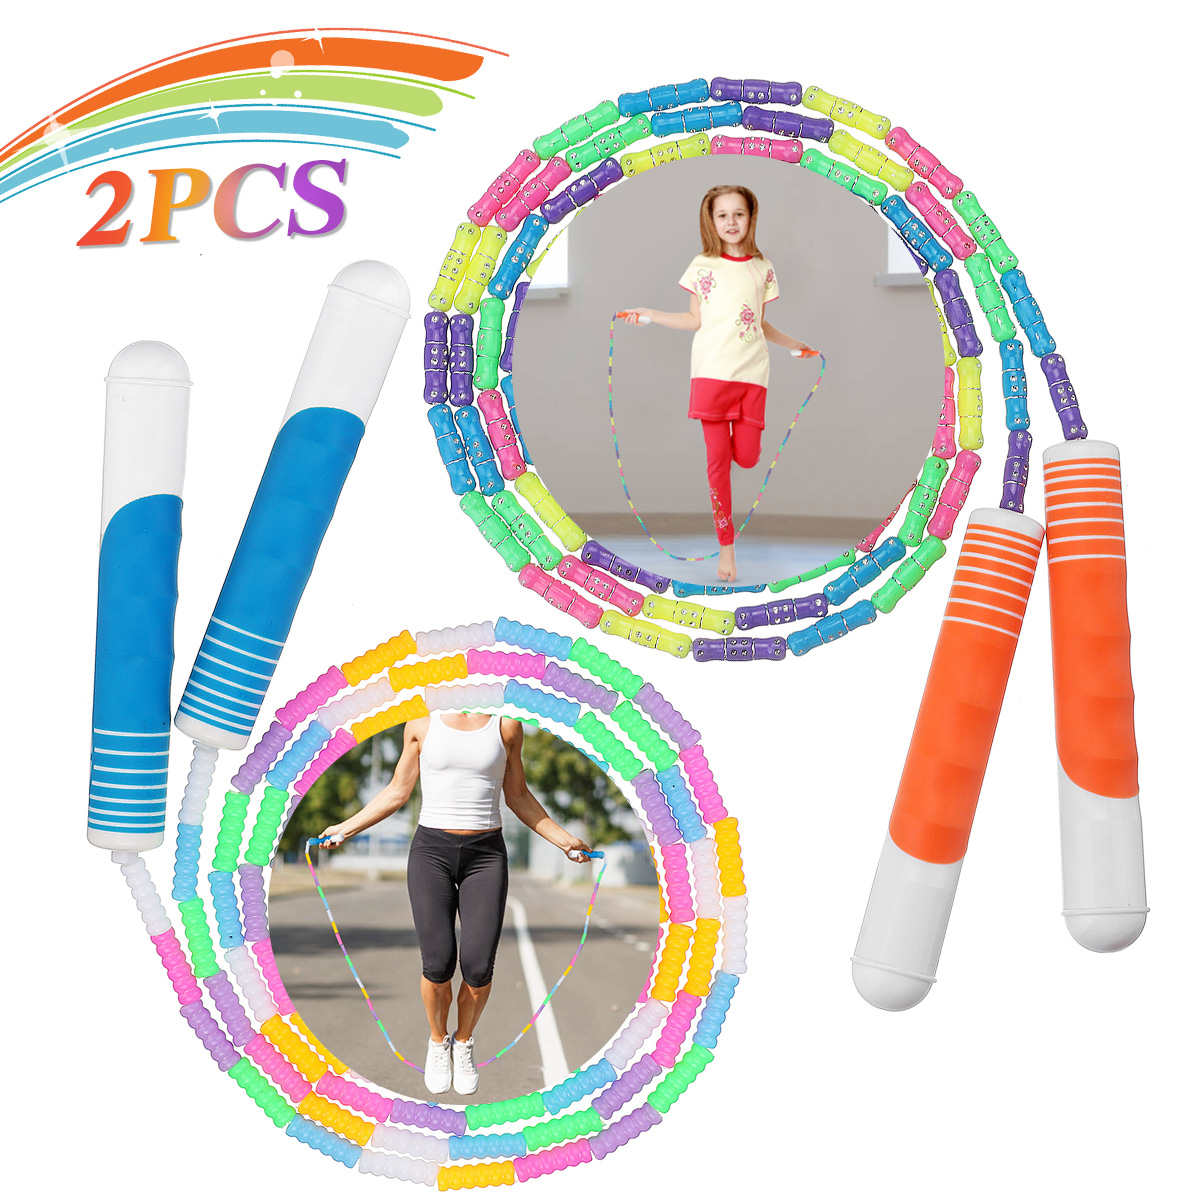 Kids Wooden Skipping Rope Jump Rope Game Healthy Activity Playing Exercise 2.4m 